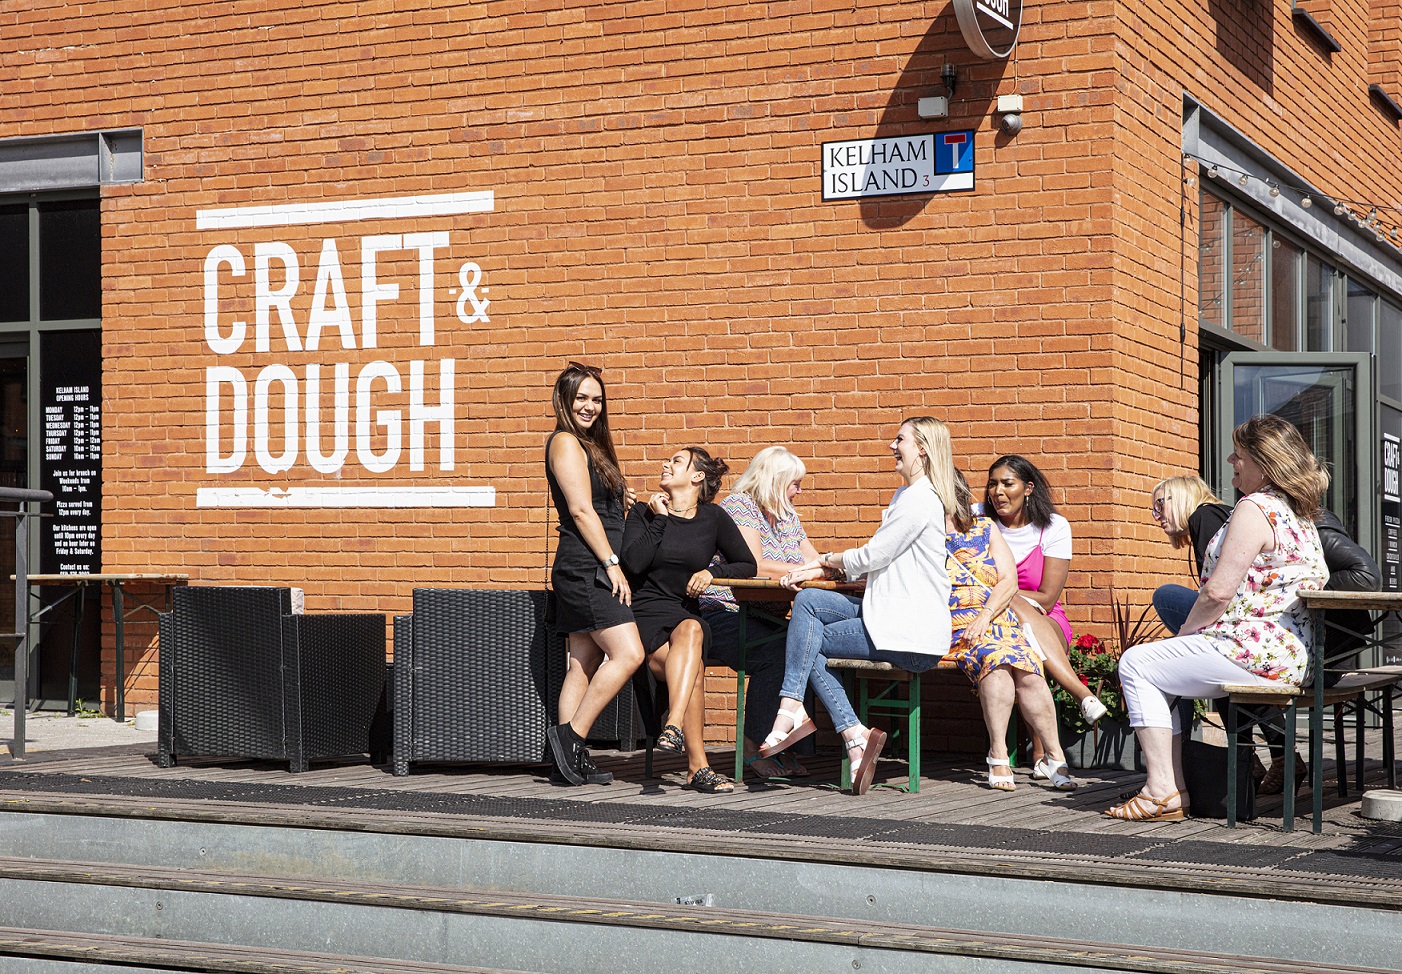 Customers enjoying the sunshine at Craft and Dough at 1a Kelham Square in Sheffield's Kelham Island, Sheffield. The conservation area has been rescued and removed from the Heritage at Risk Register in 2019.